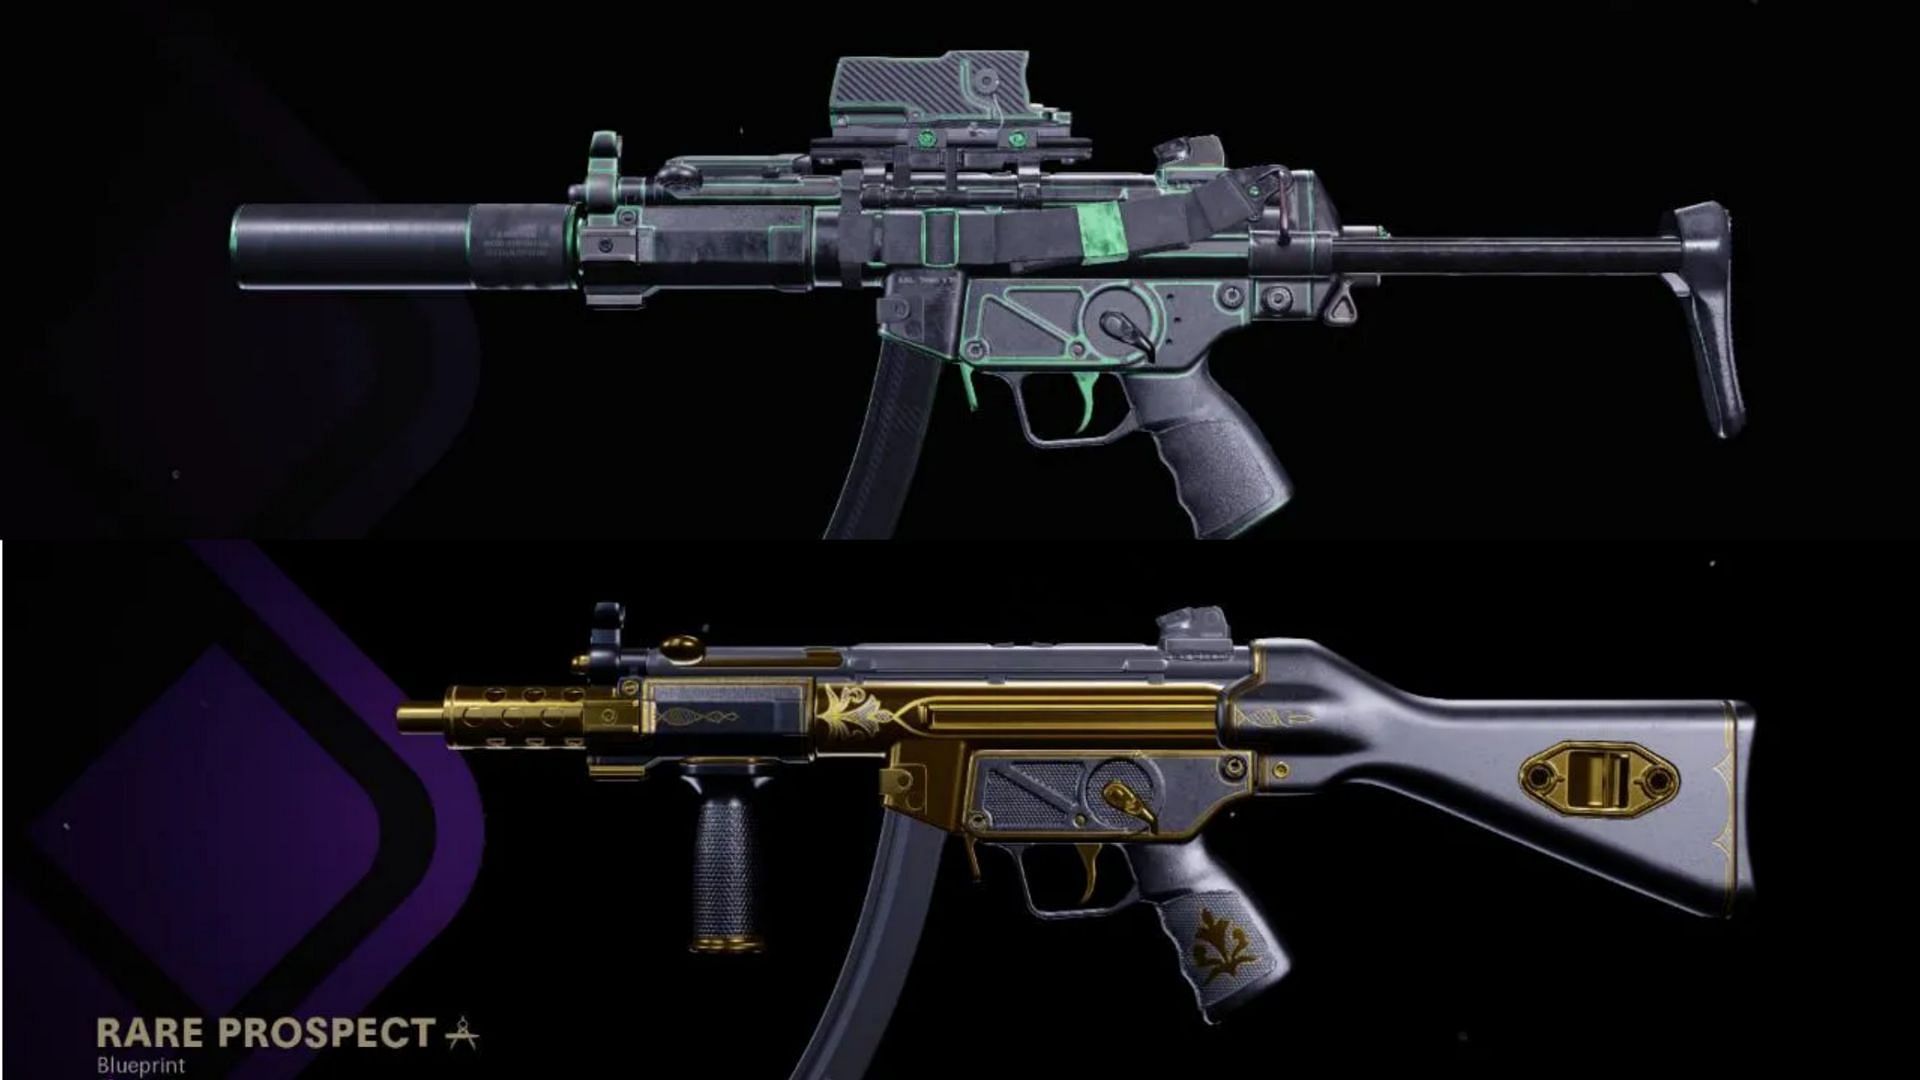 Some available blueprints for the MP5 SMG in-game (Image via Warzone/Activision)